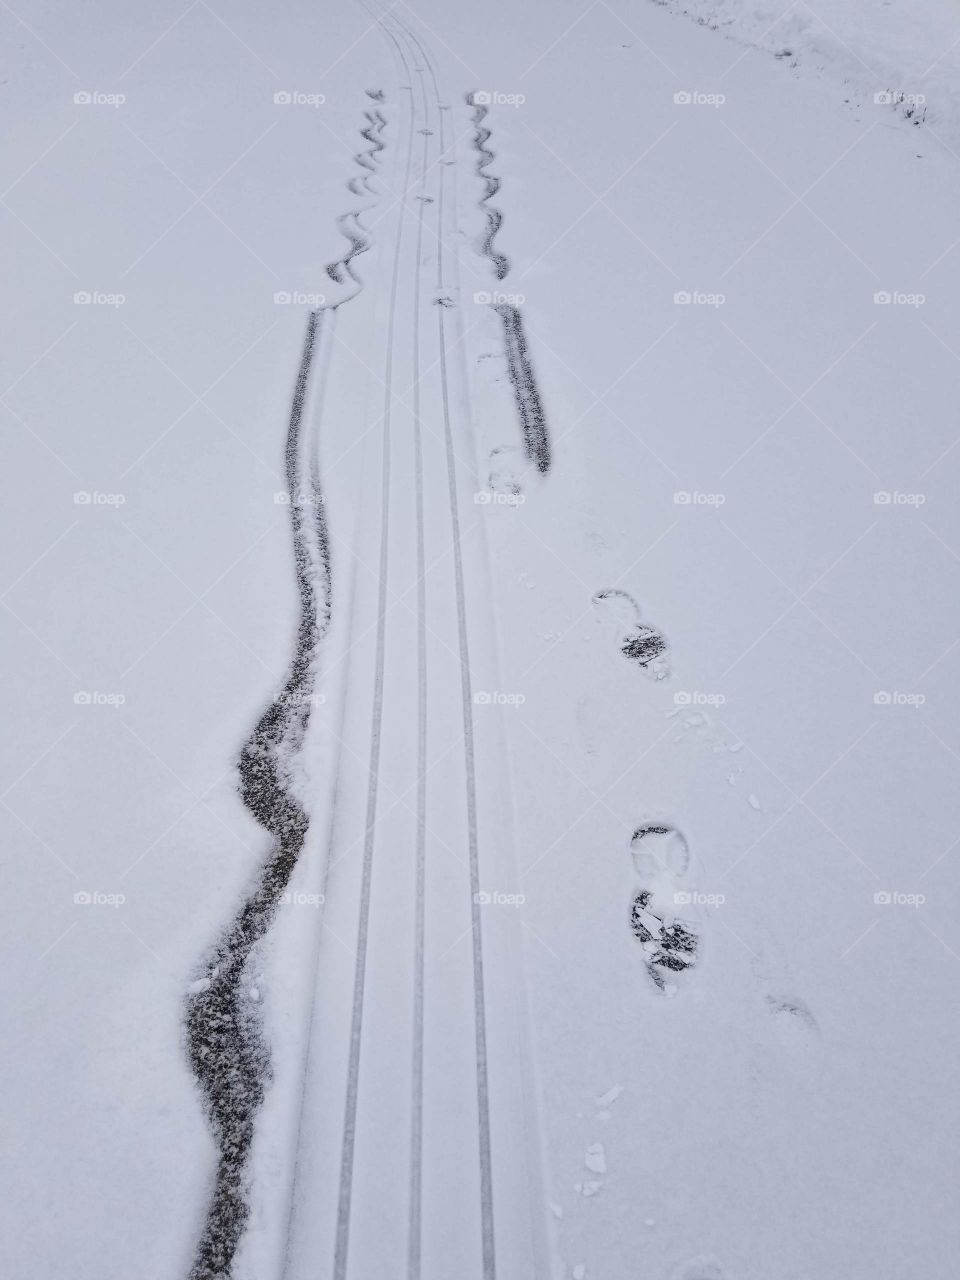 sled tracks with little mitten hand marks trailing on both sides, fun in the snow walking in a winter wonder land, toddlers